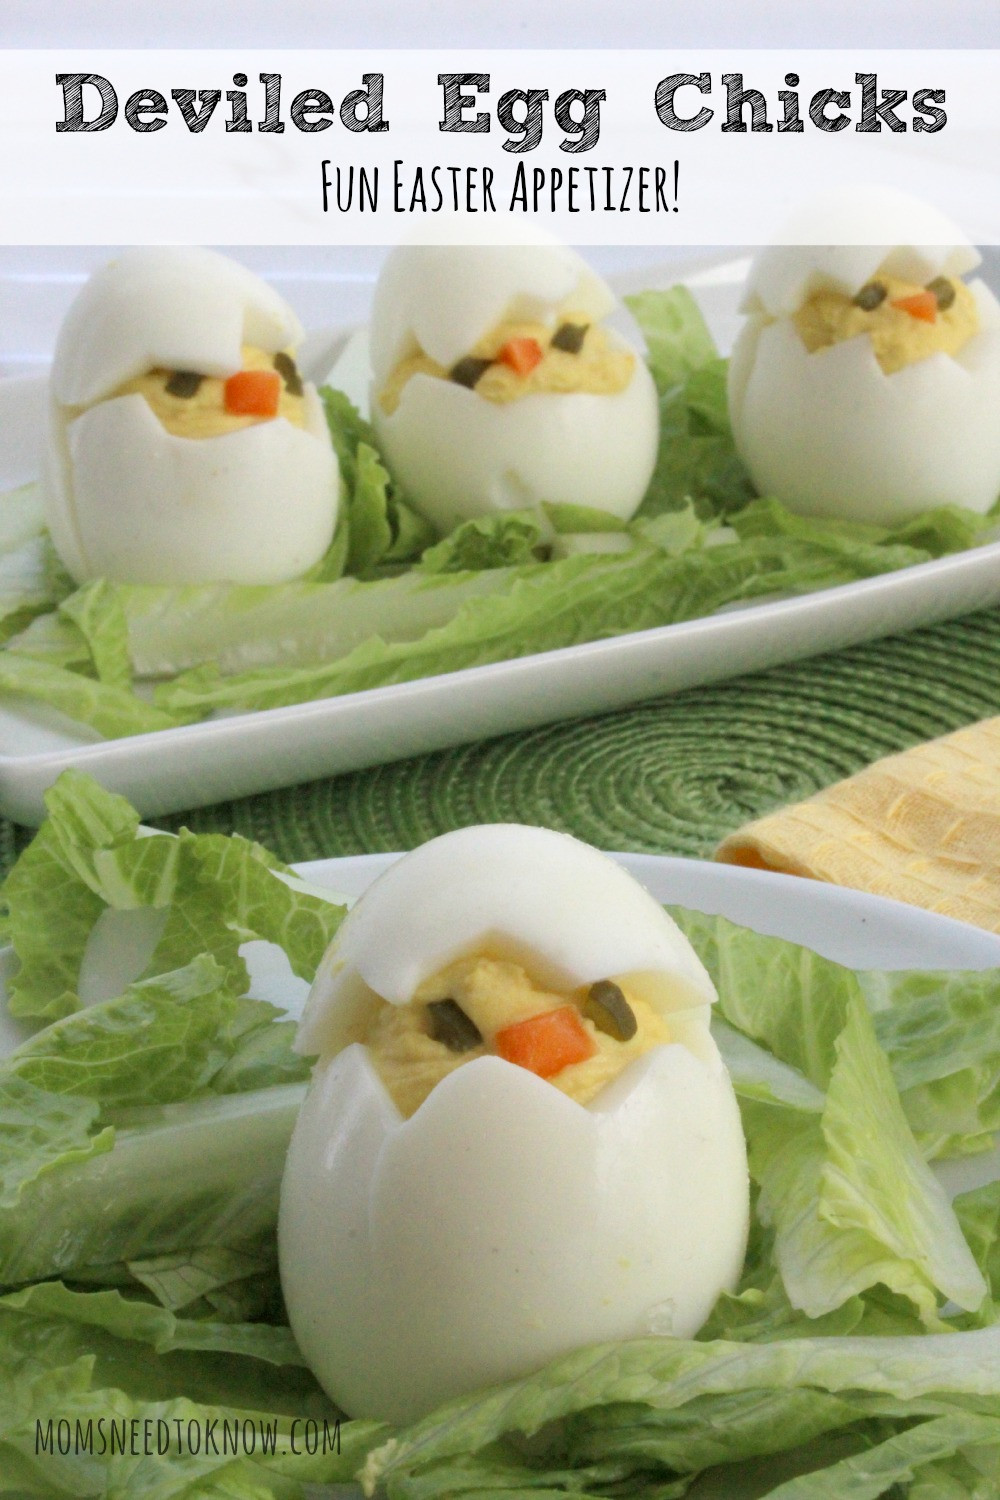 Fun Easter Appetizers the Best How to Make Deviled Egg Chicks